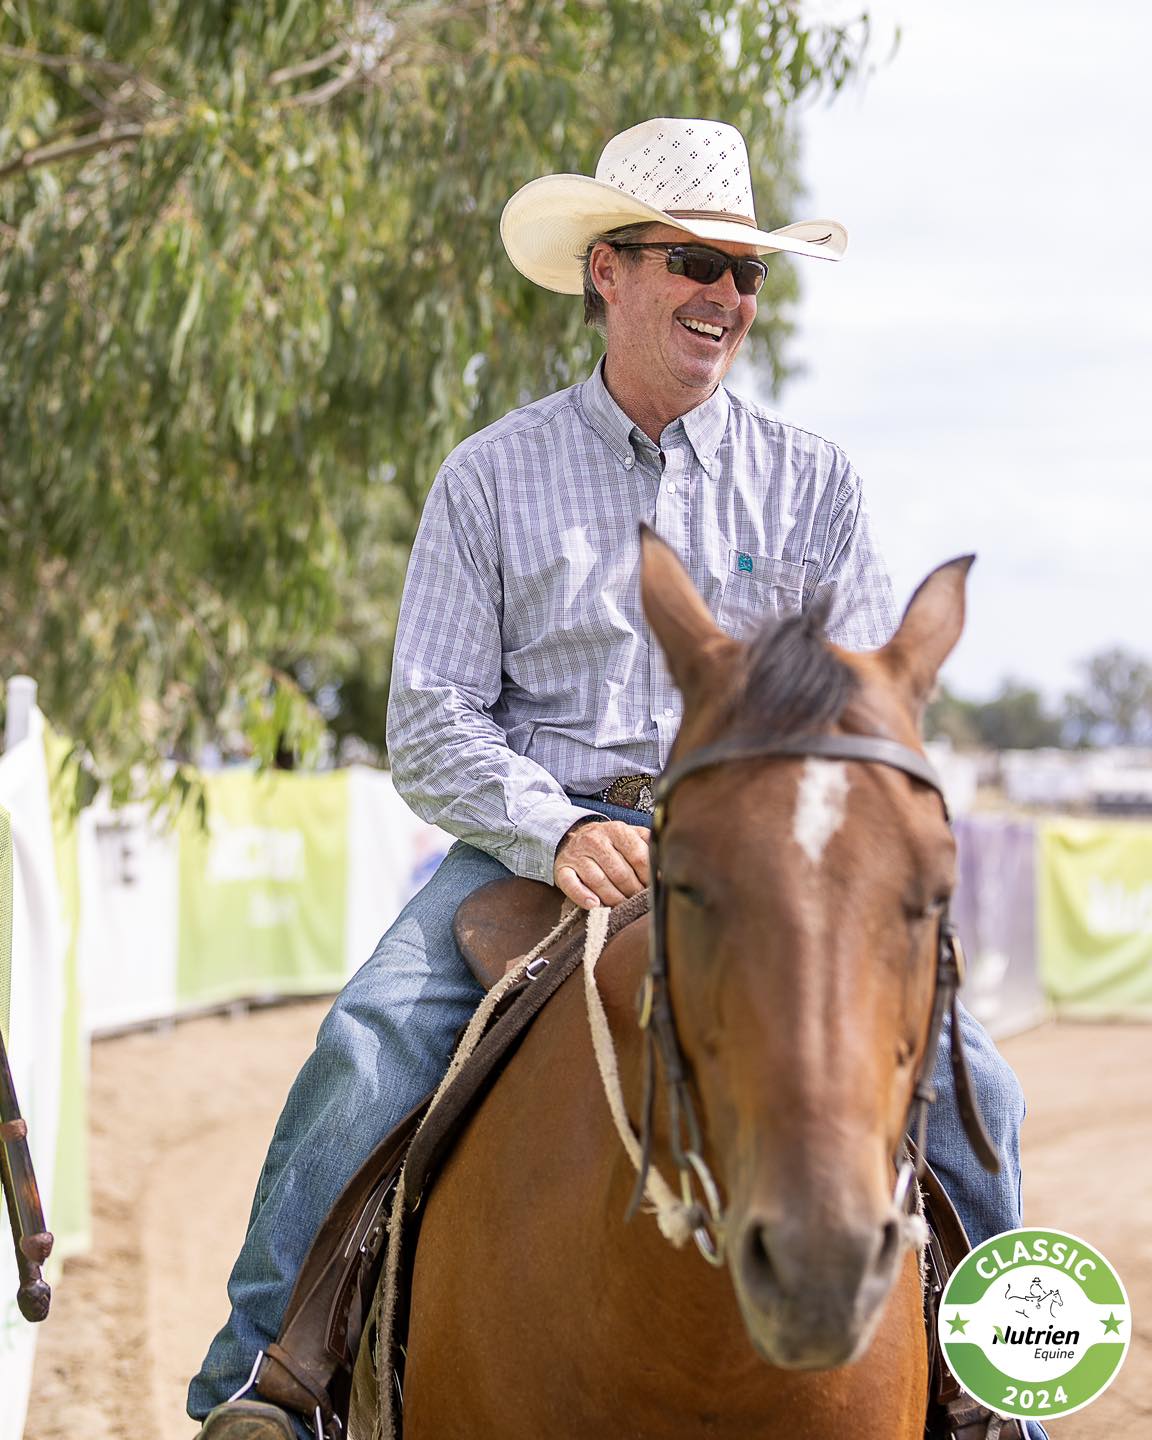 Lachie Maxwell was all smiles yesterday whilst Judging our Round 1 of the Dalgety Stallion shootout.